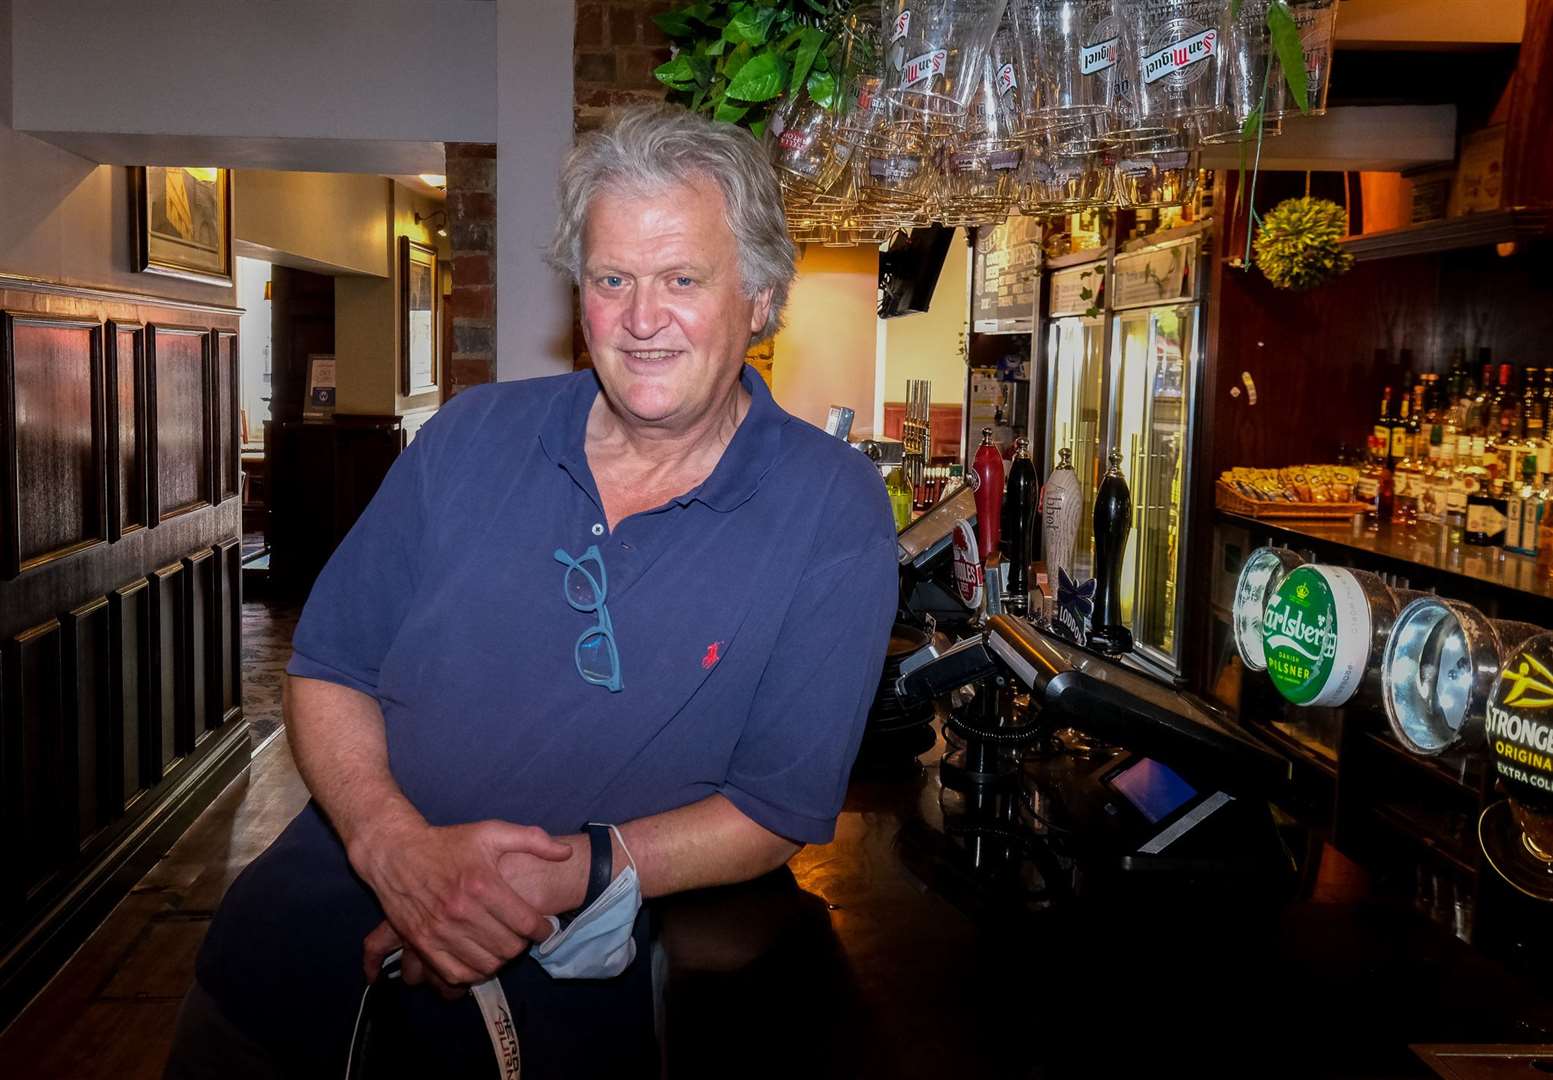 Wetherspoons chairman Tim Martin will reduce all prices on Thursday to highlight the impact a VAT reduction could have